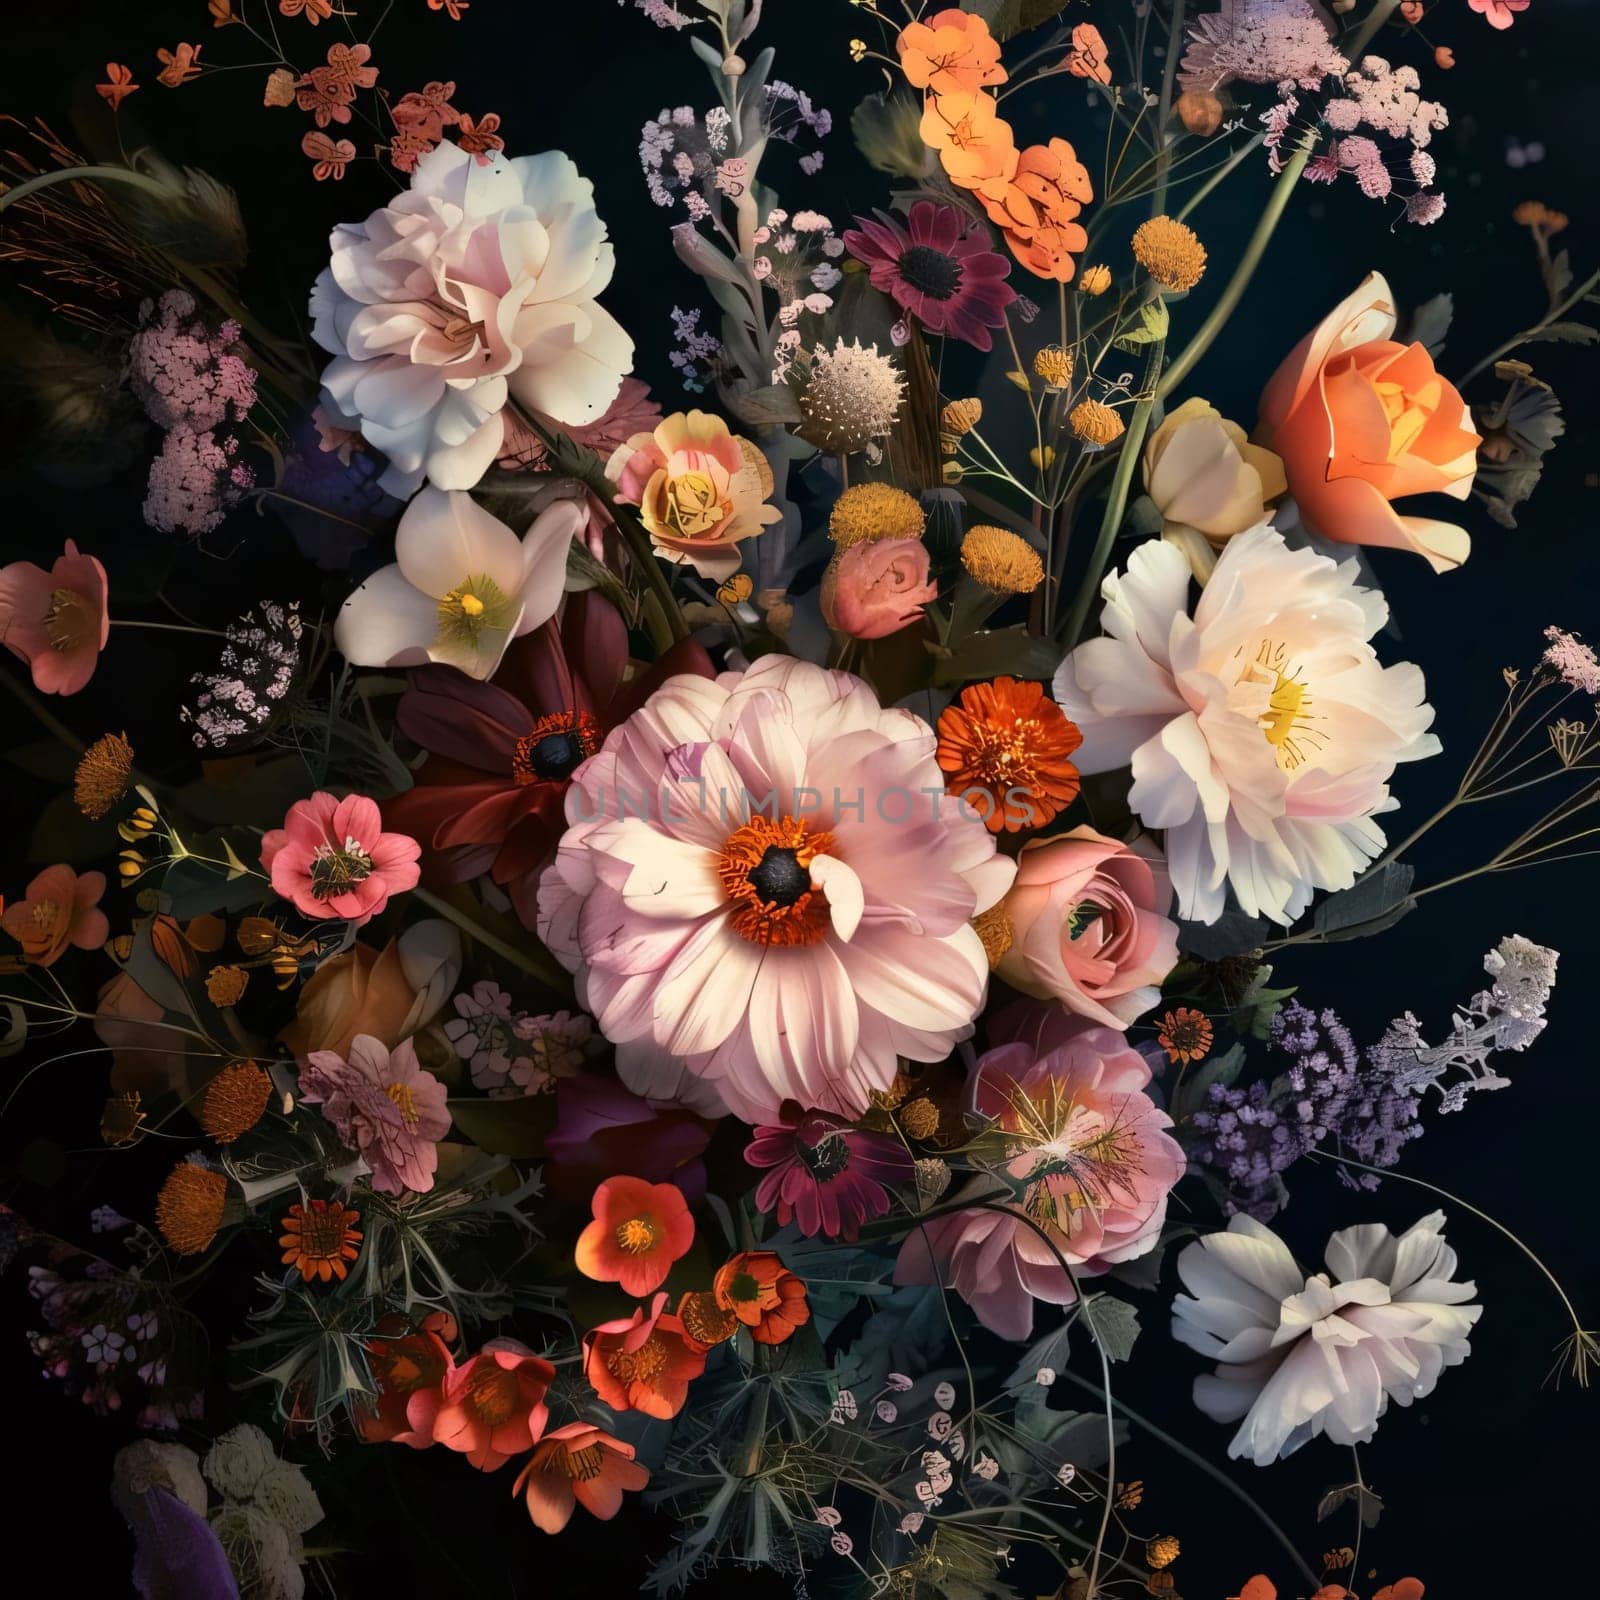 A bouquet of colorful field flowers on a dark background. Flowering flowers, a symbol of spring, new life. A joyful time of nature waking up to life.